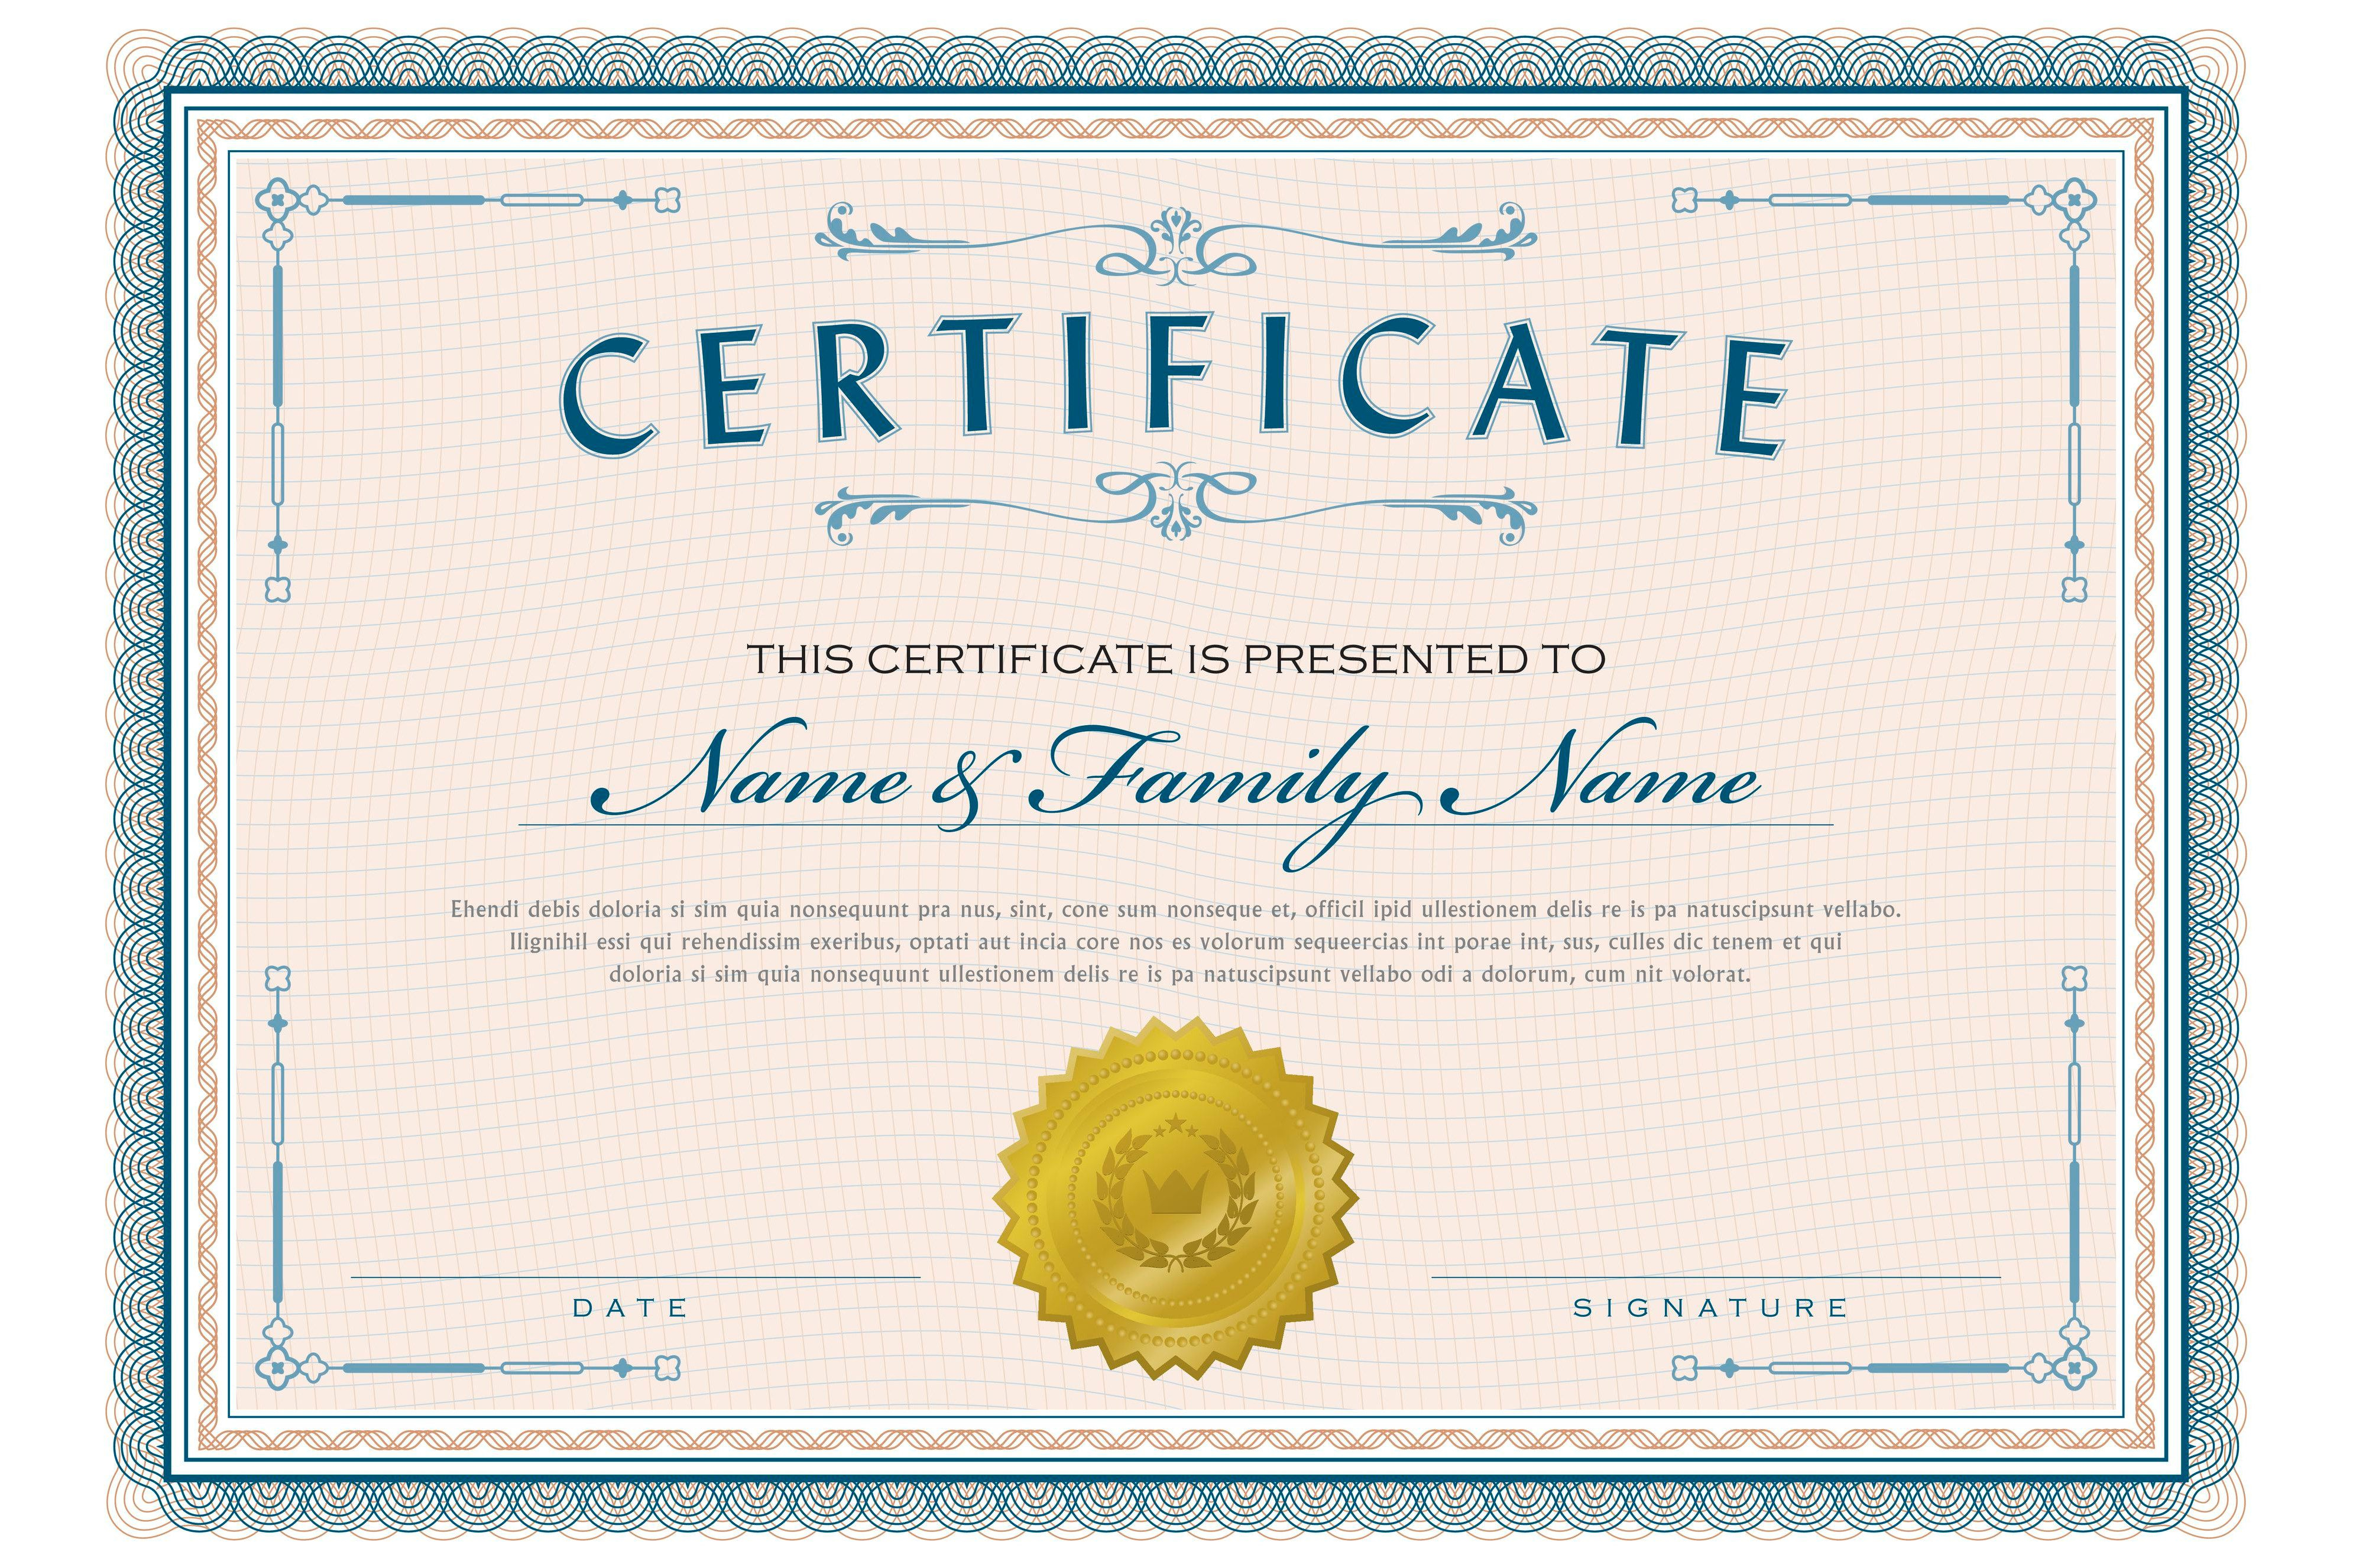 Necessary Parts Of An Award Certificate Throughout Student Of The Year Award Certificate Templates